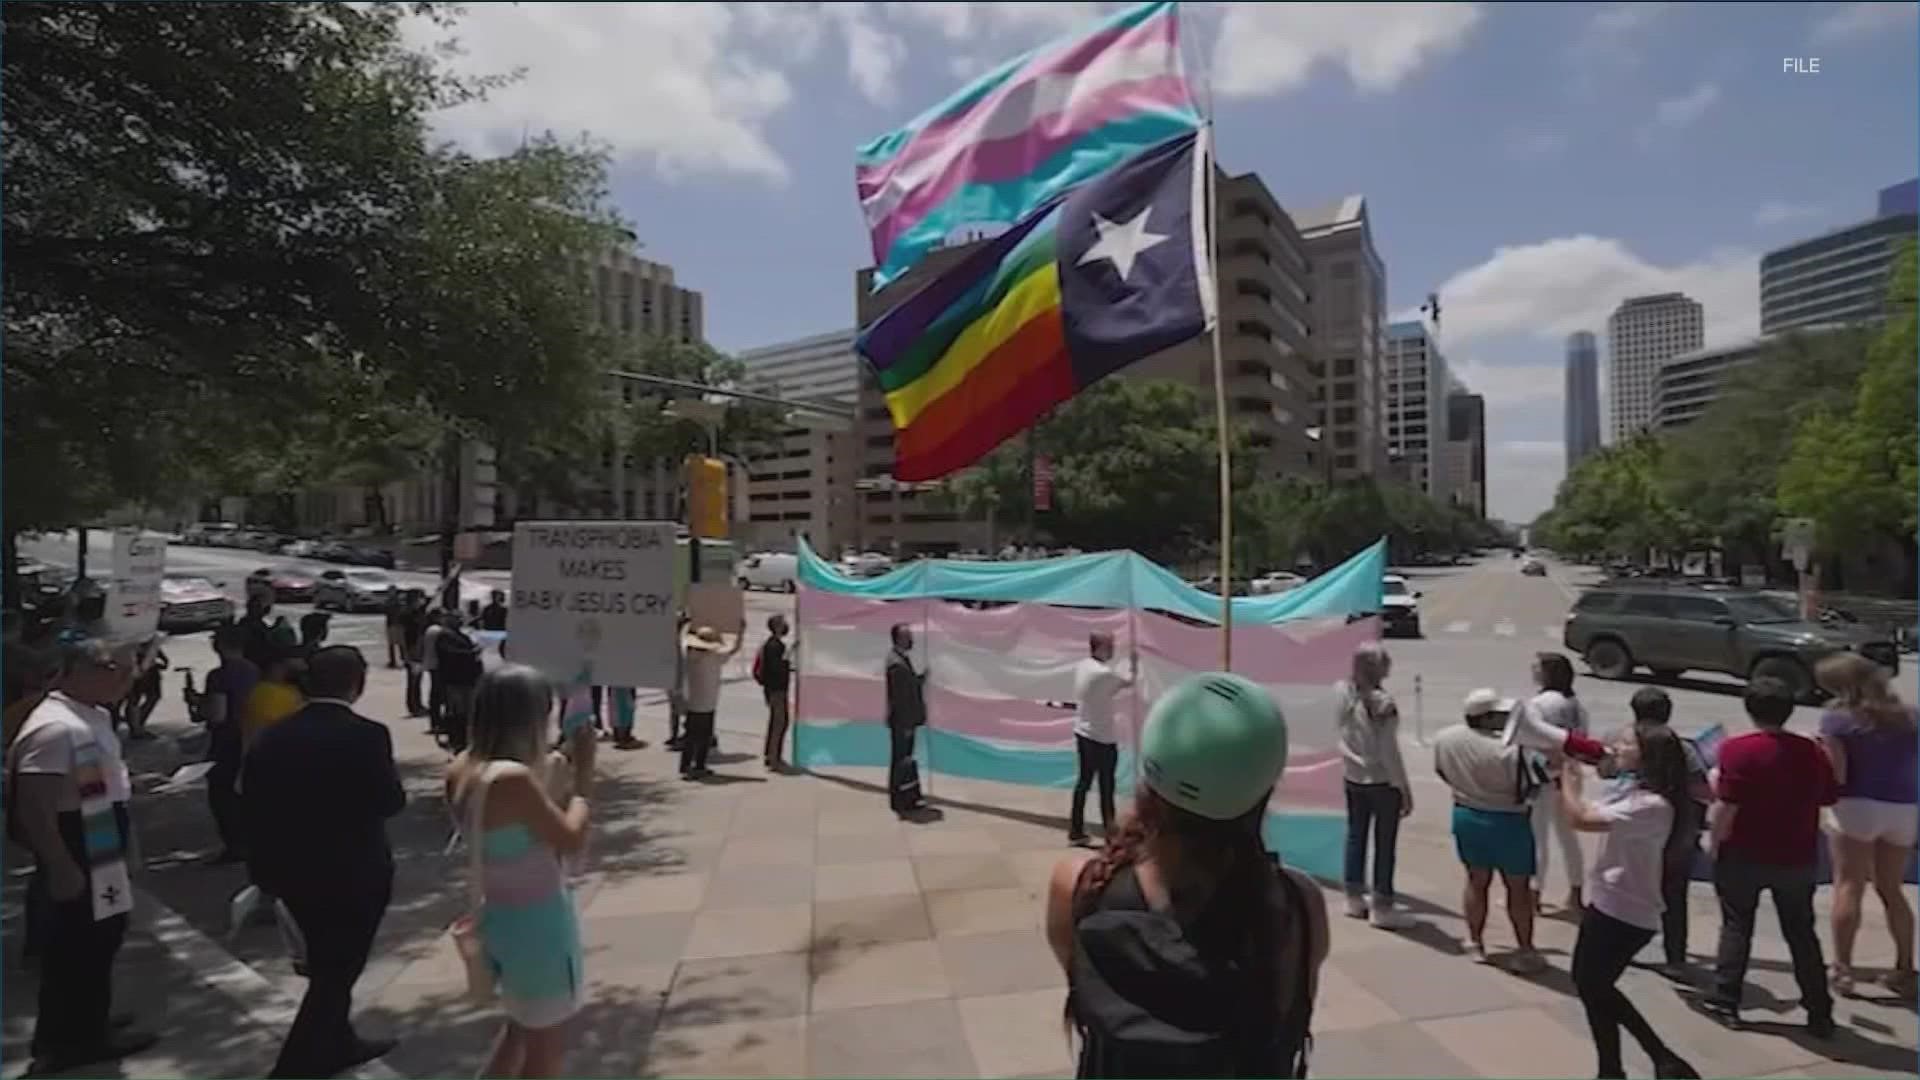 A state office in Texas is seeking data on transgender residents in the state.